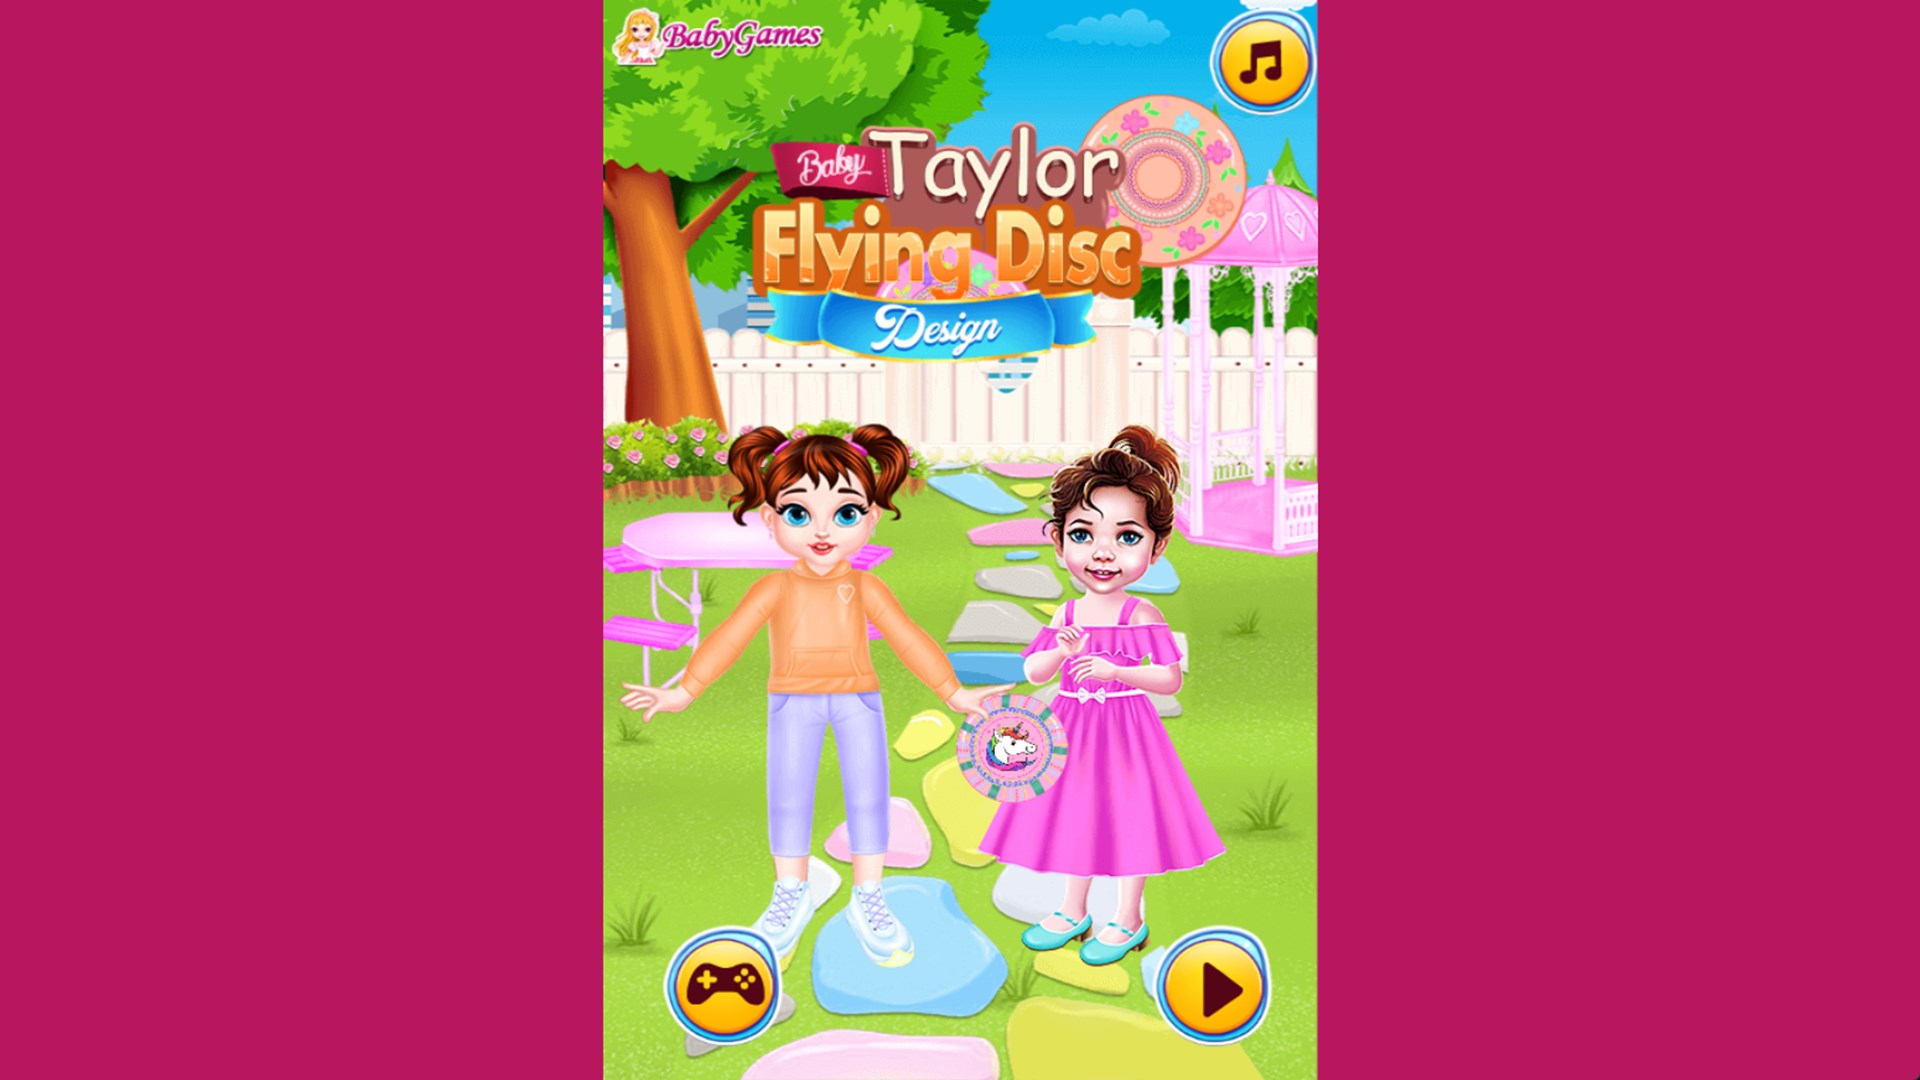 Get Baby Taylor Flying Disc Design - Microsoft Store